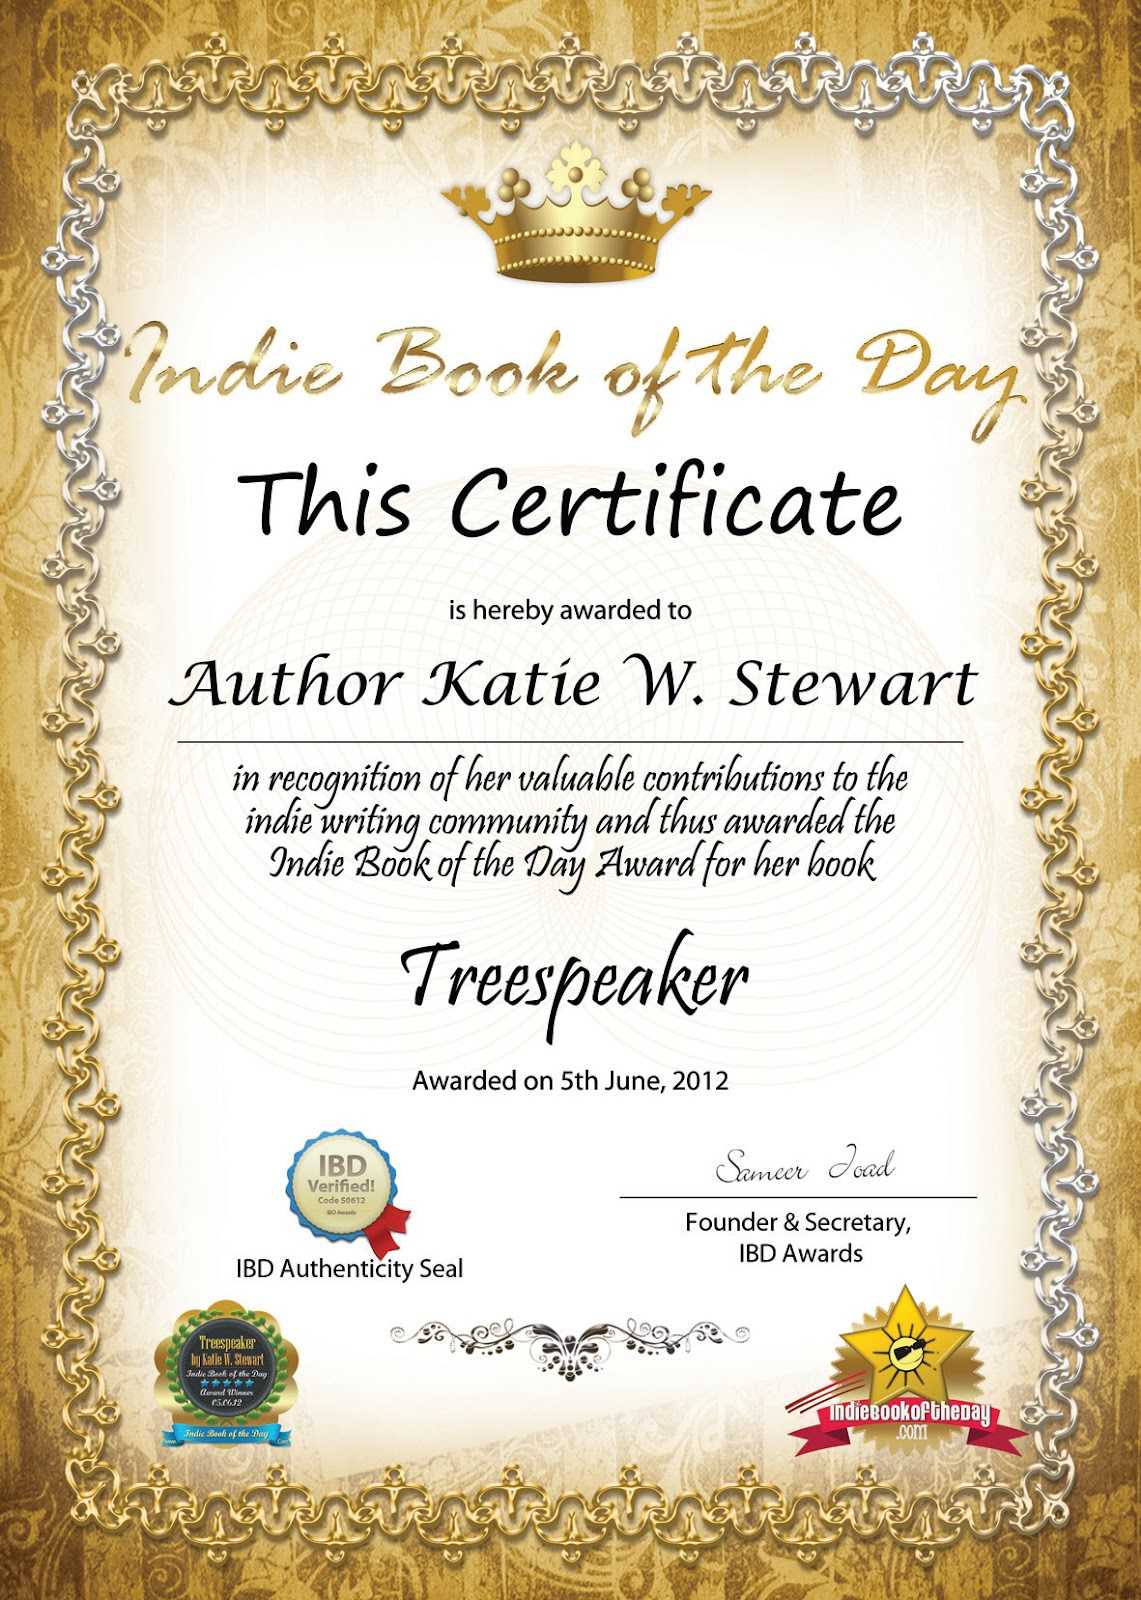 Small Certificate Template ] - Free Gift Certificate Inside Small Certificate Template